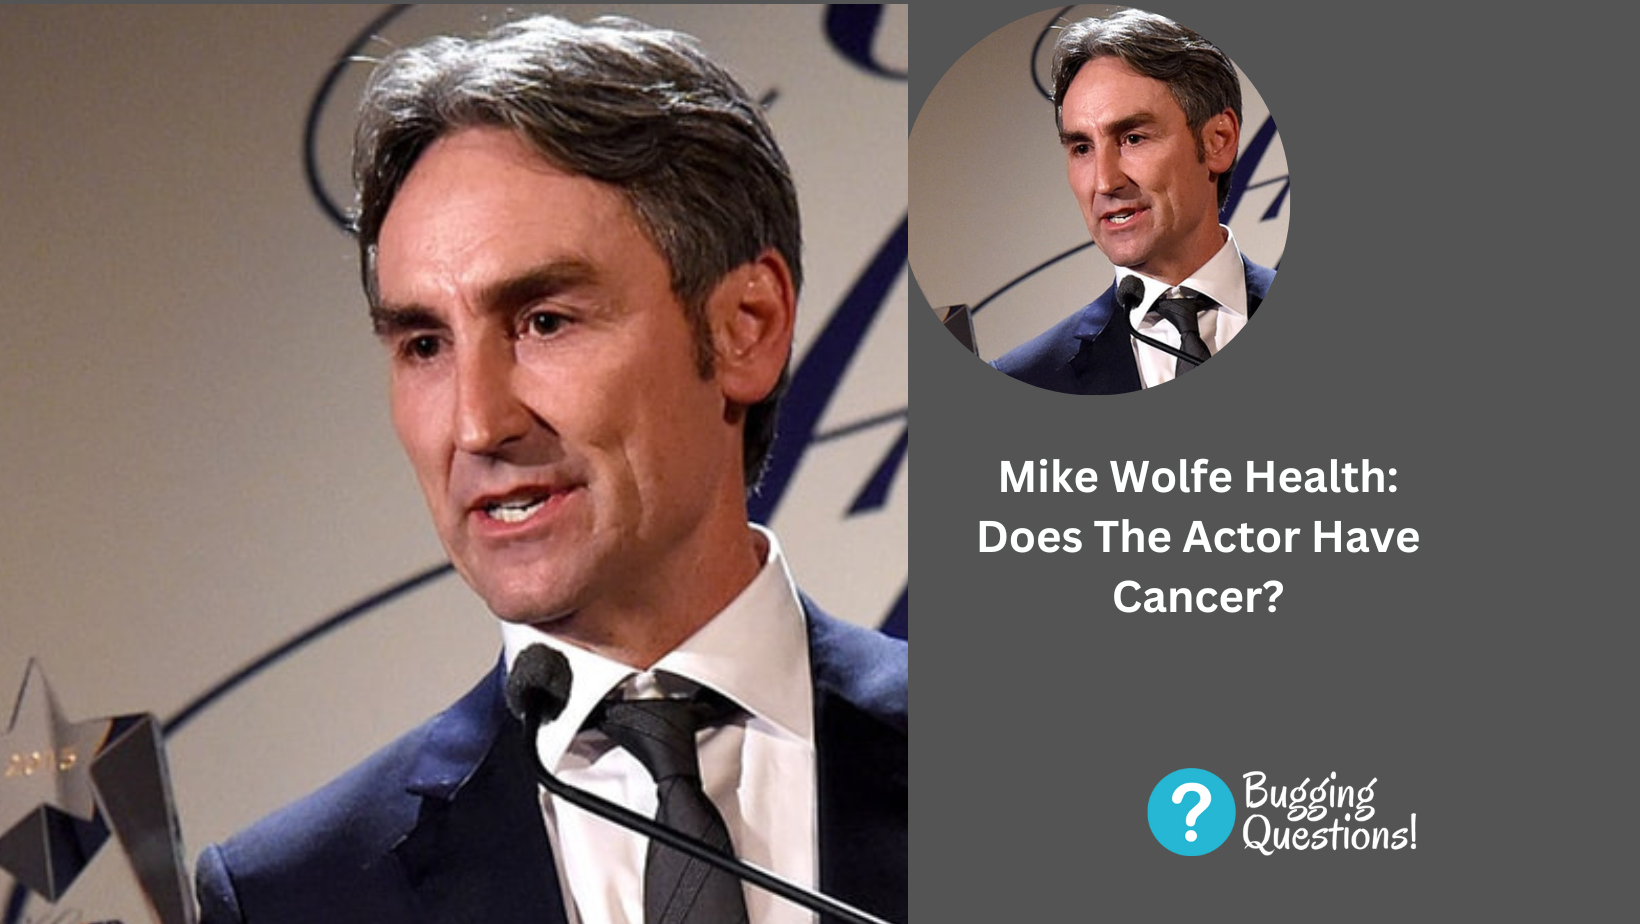 Mike Wolfe Health: Does The Actor Have Cancer?